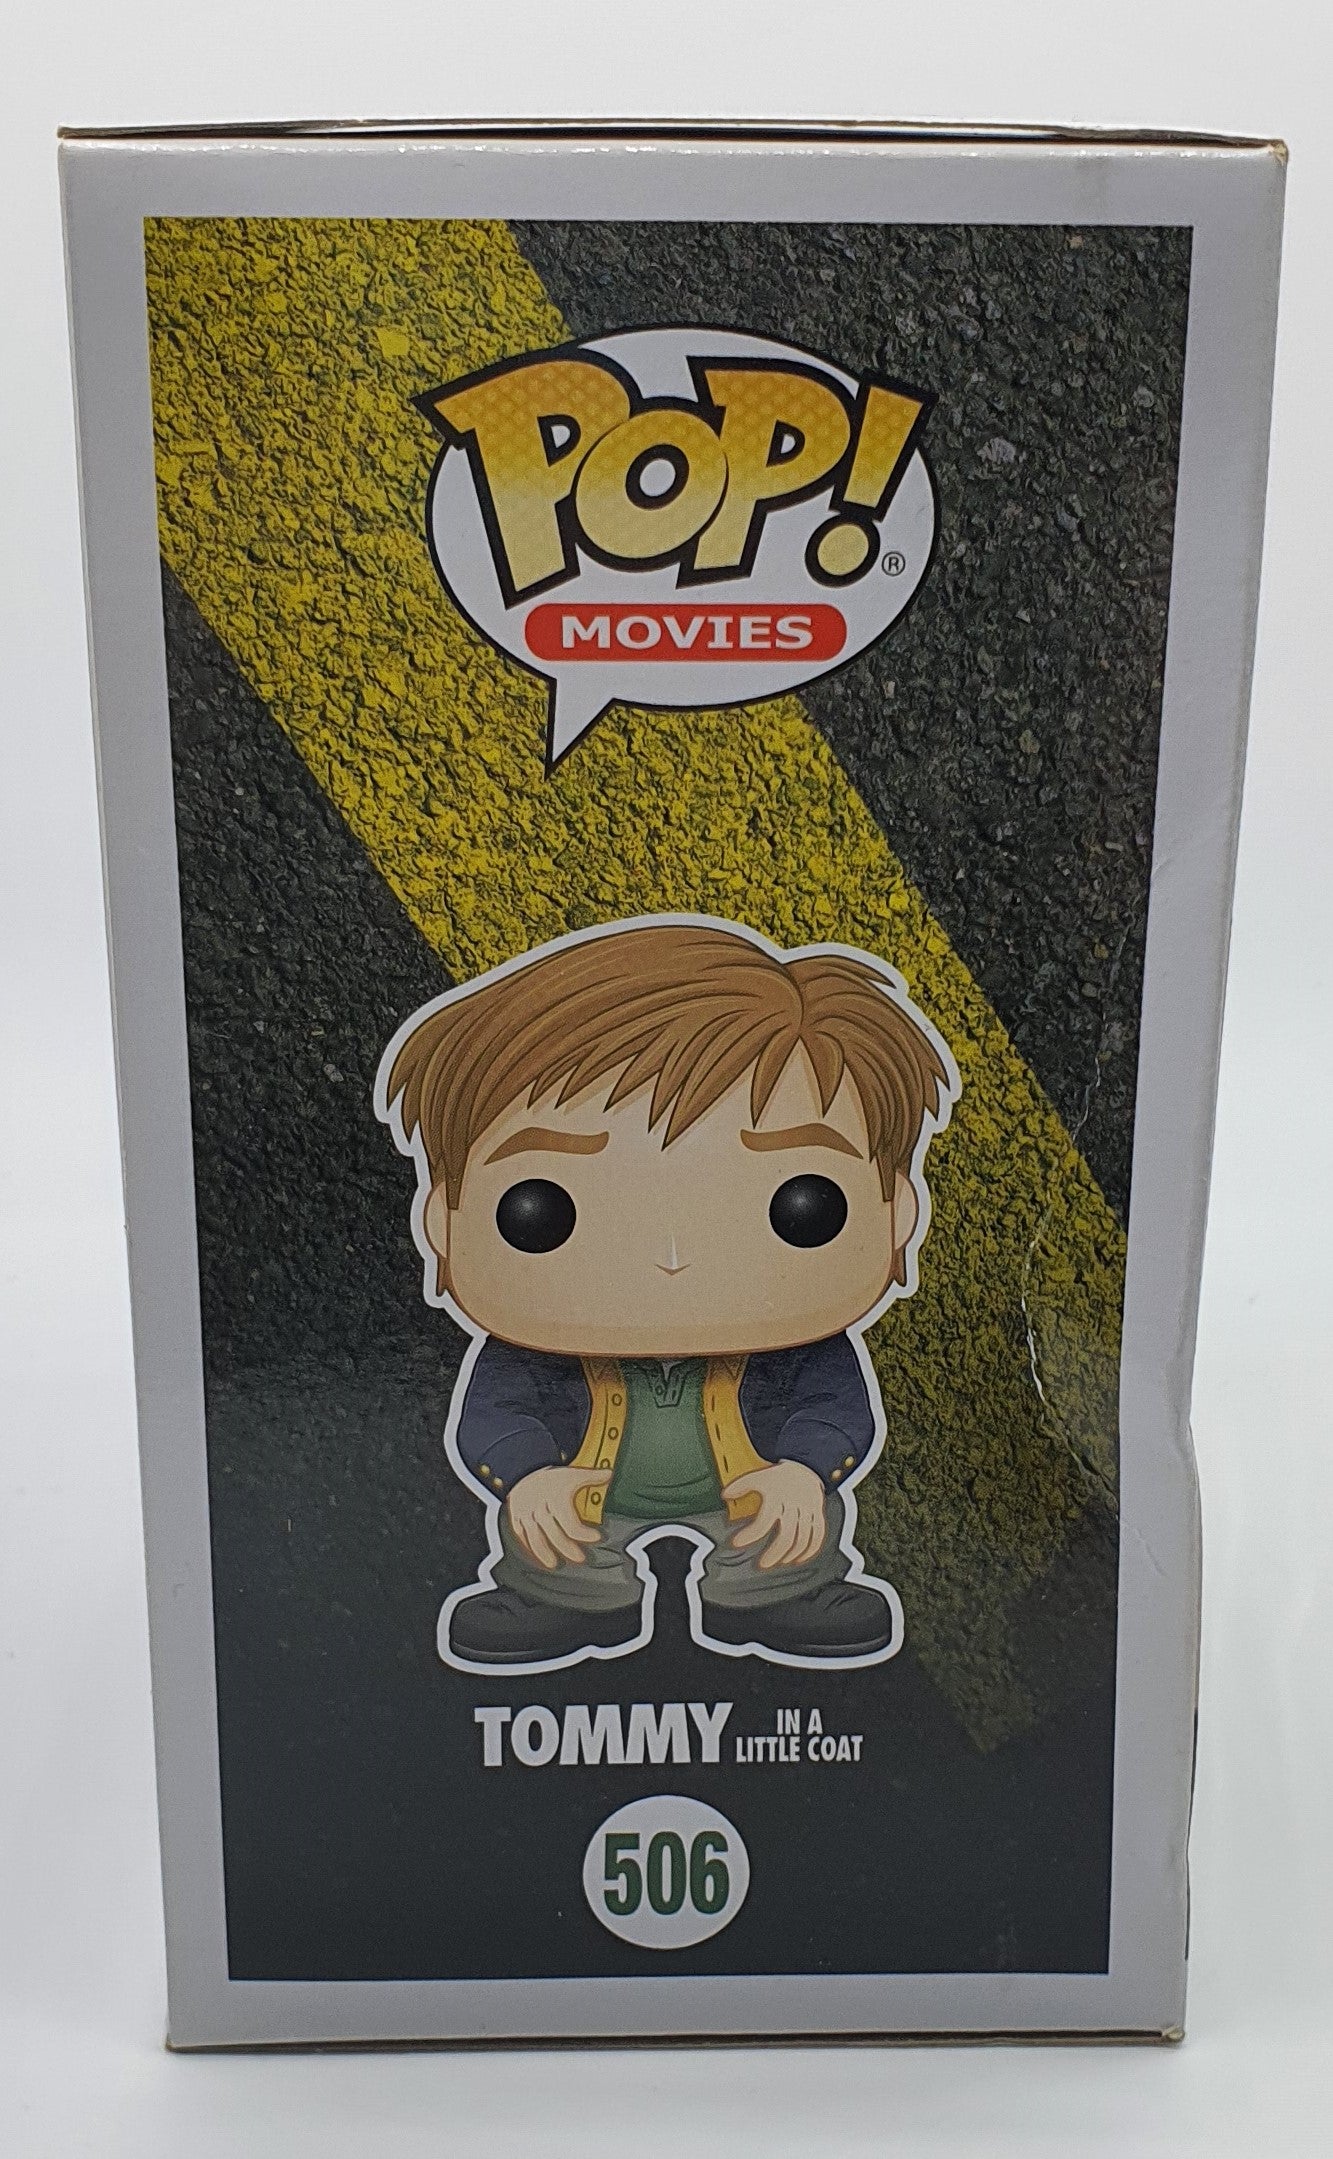 506 - MOVIES - TOMMY BOY - TOMMY